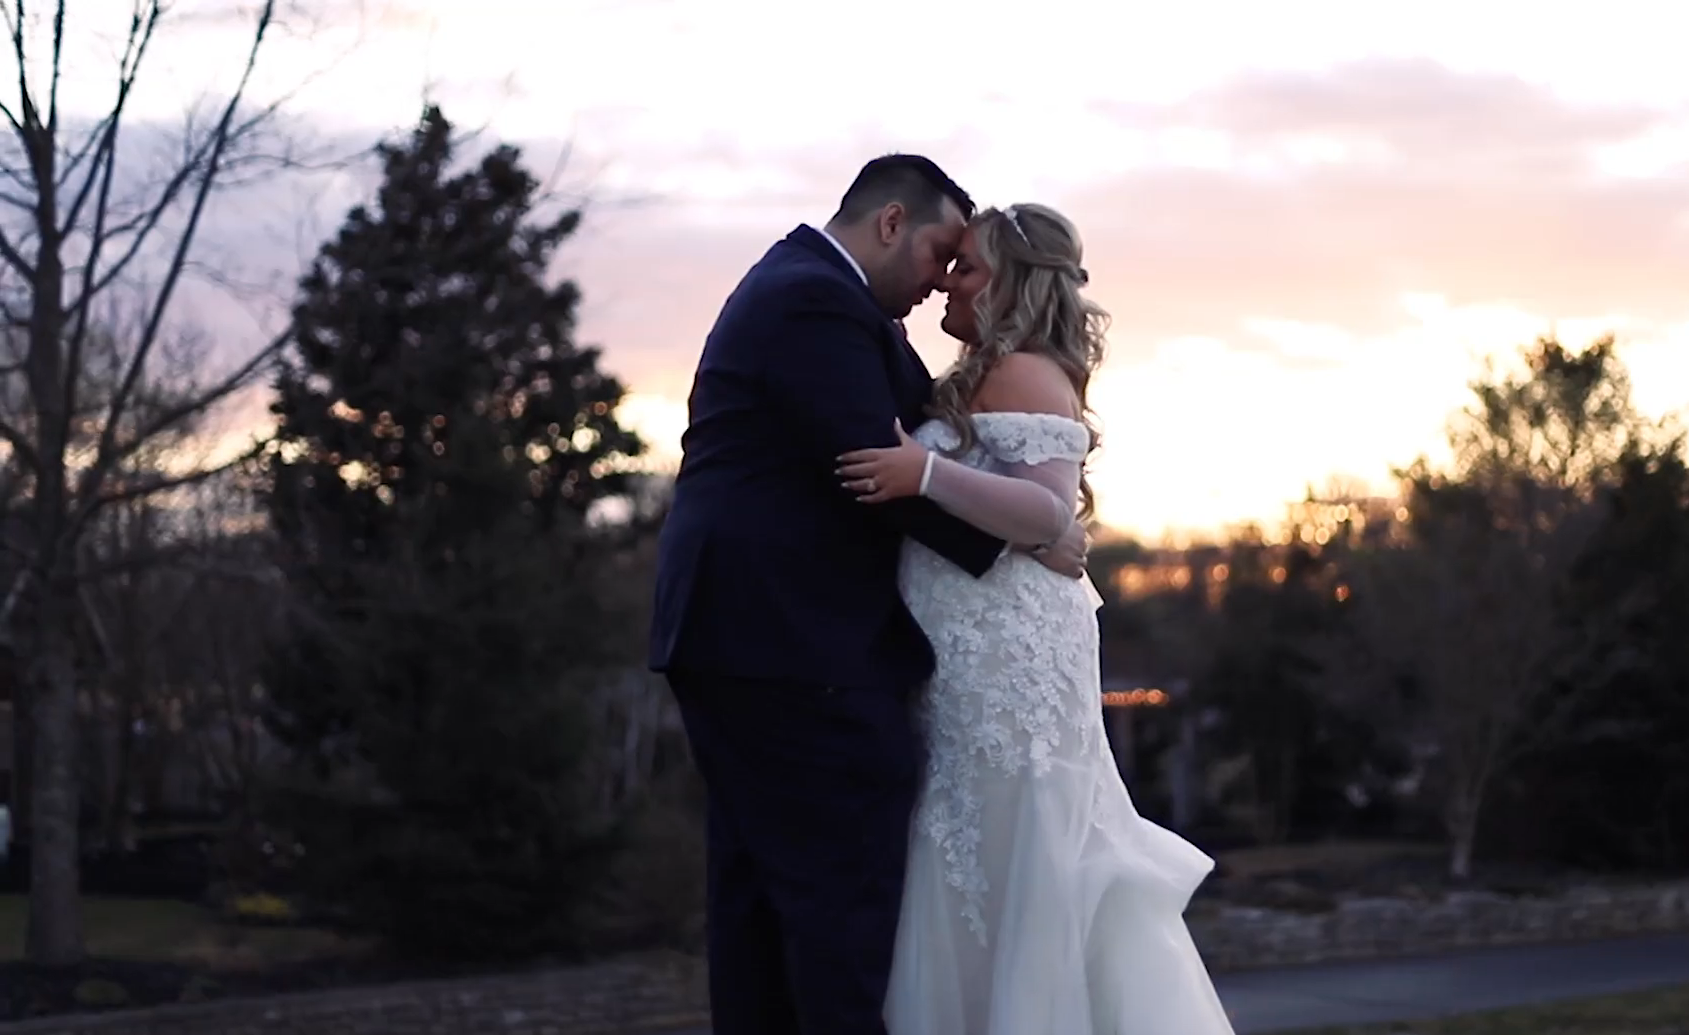 South Jersey Wedding Videography